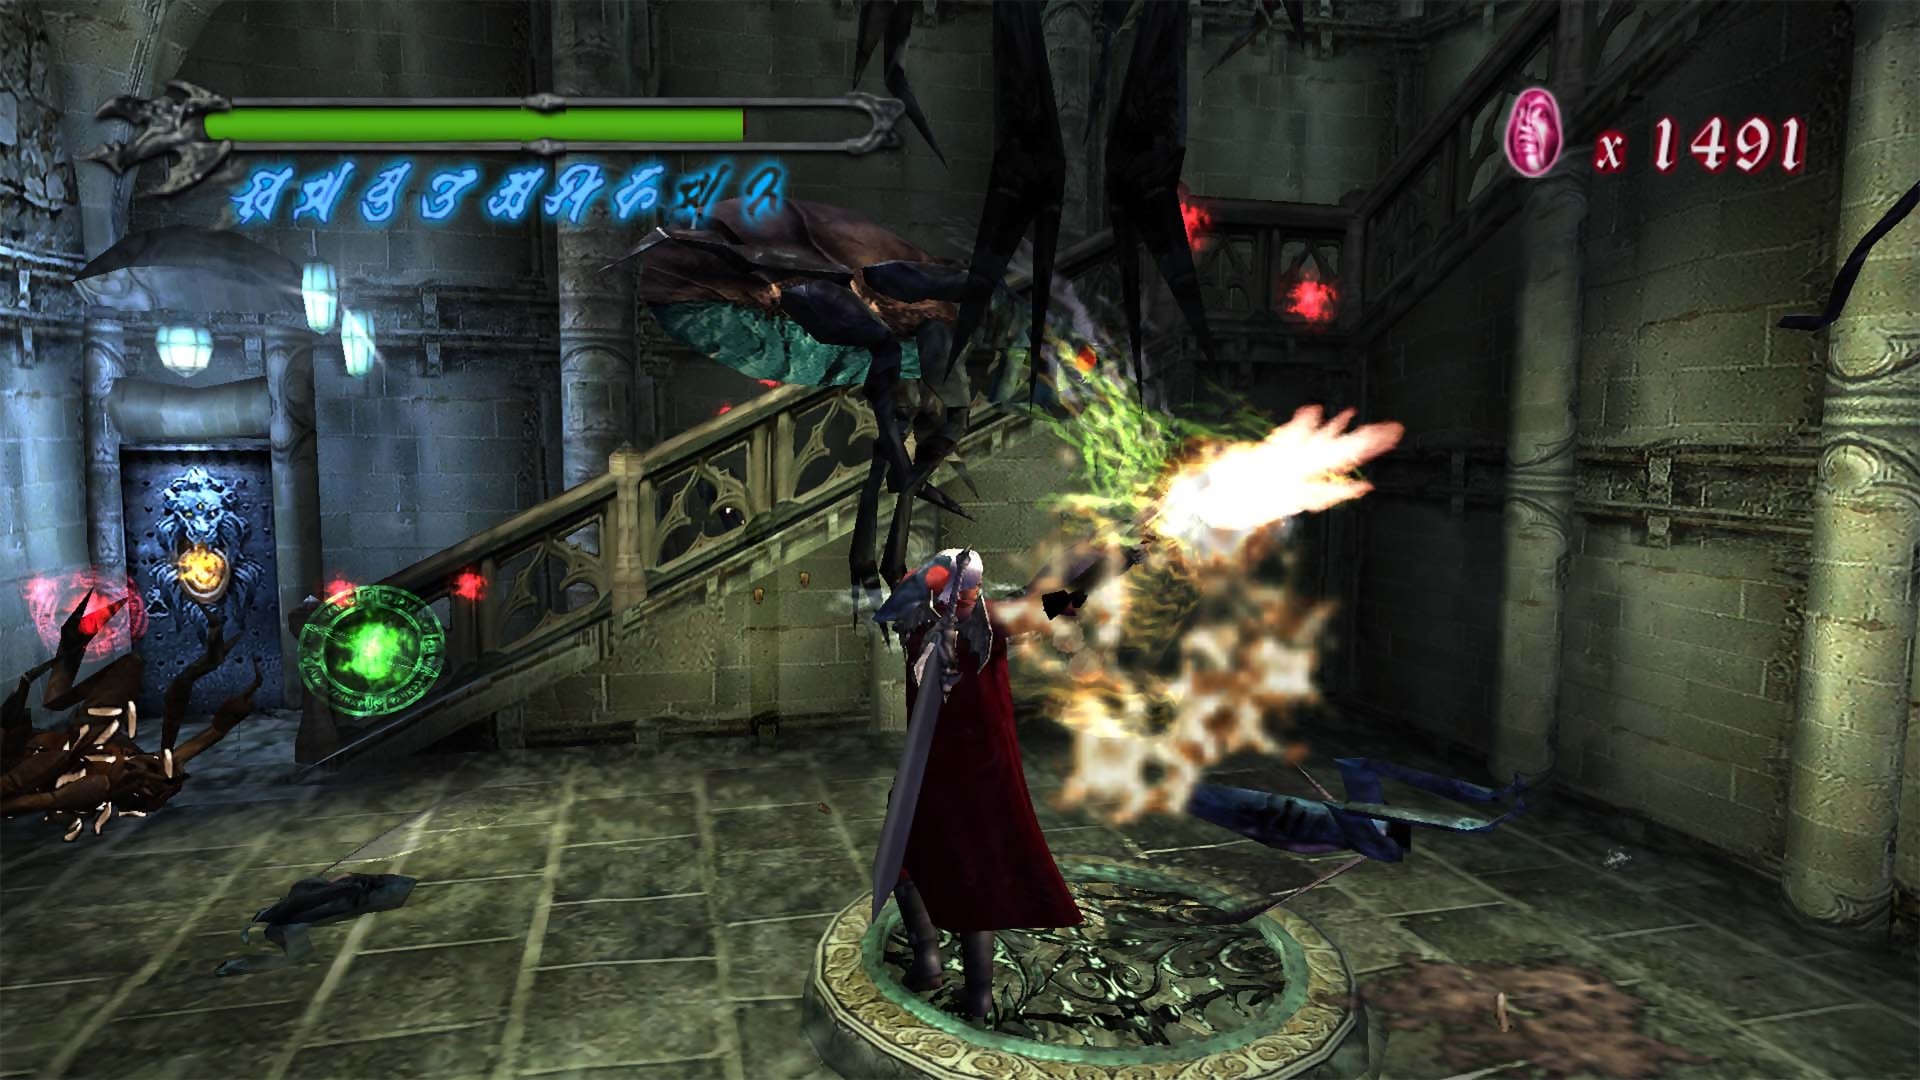 devil may cry hd collection